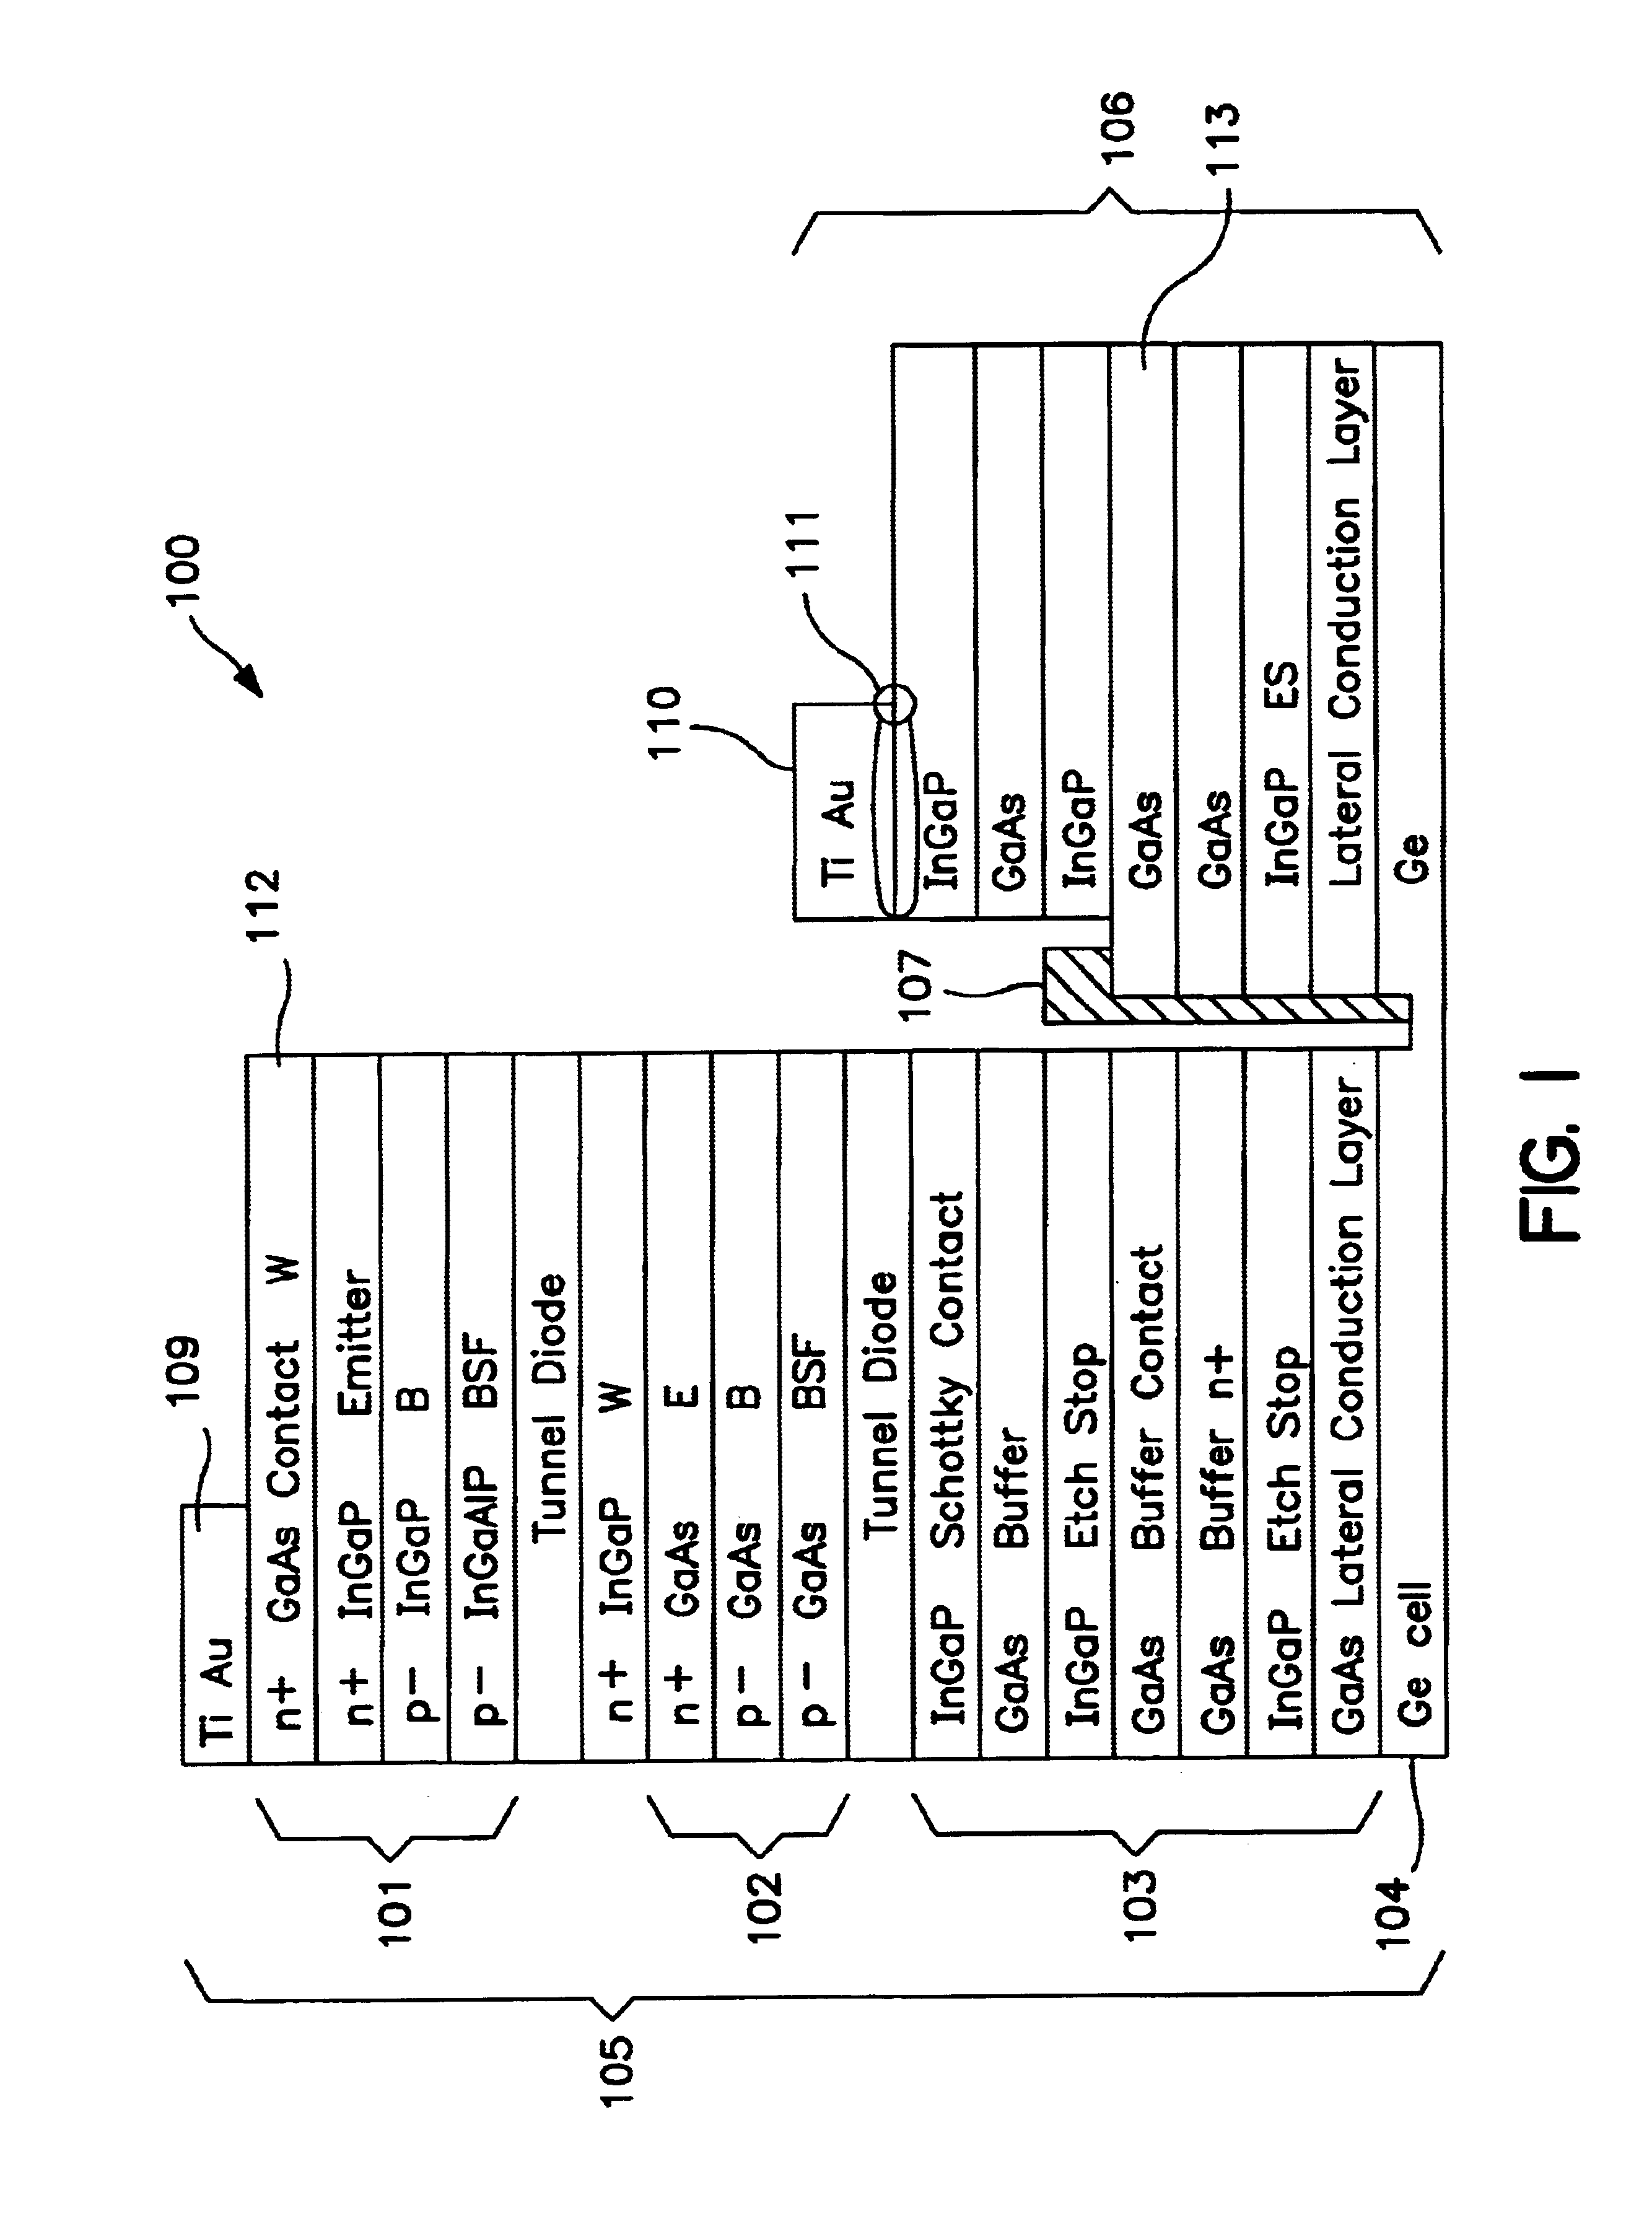 Apparatus and method for optimizing the efficiency of a bypass diode in multijunction solar cells